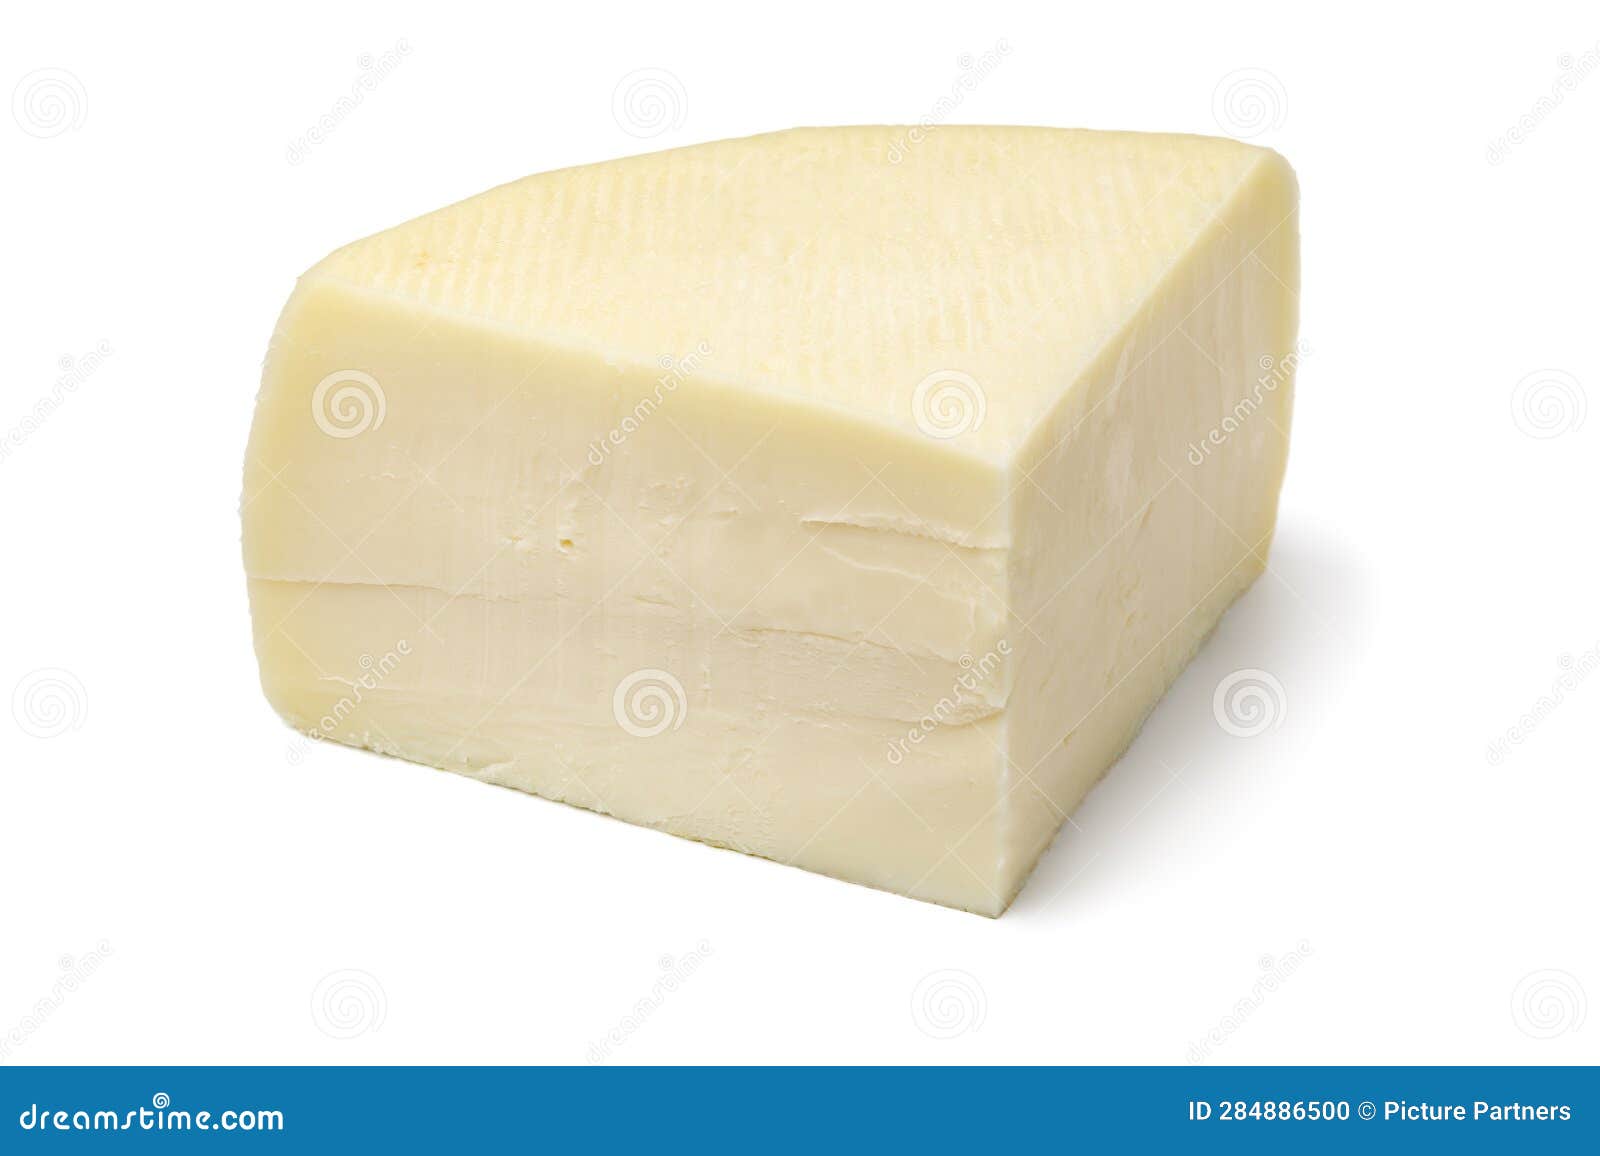 piece of artisanal of semi soft italian bel paese cheese on white background close up